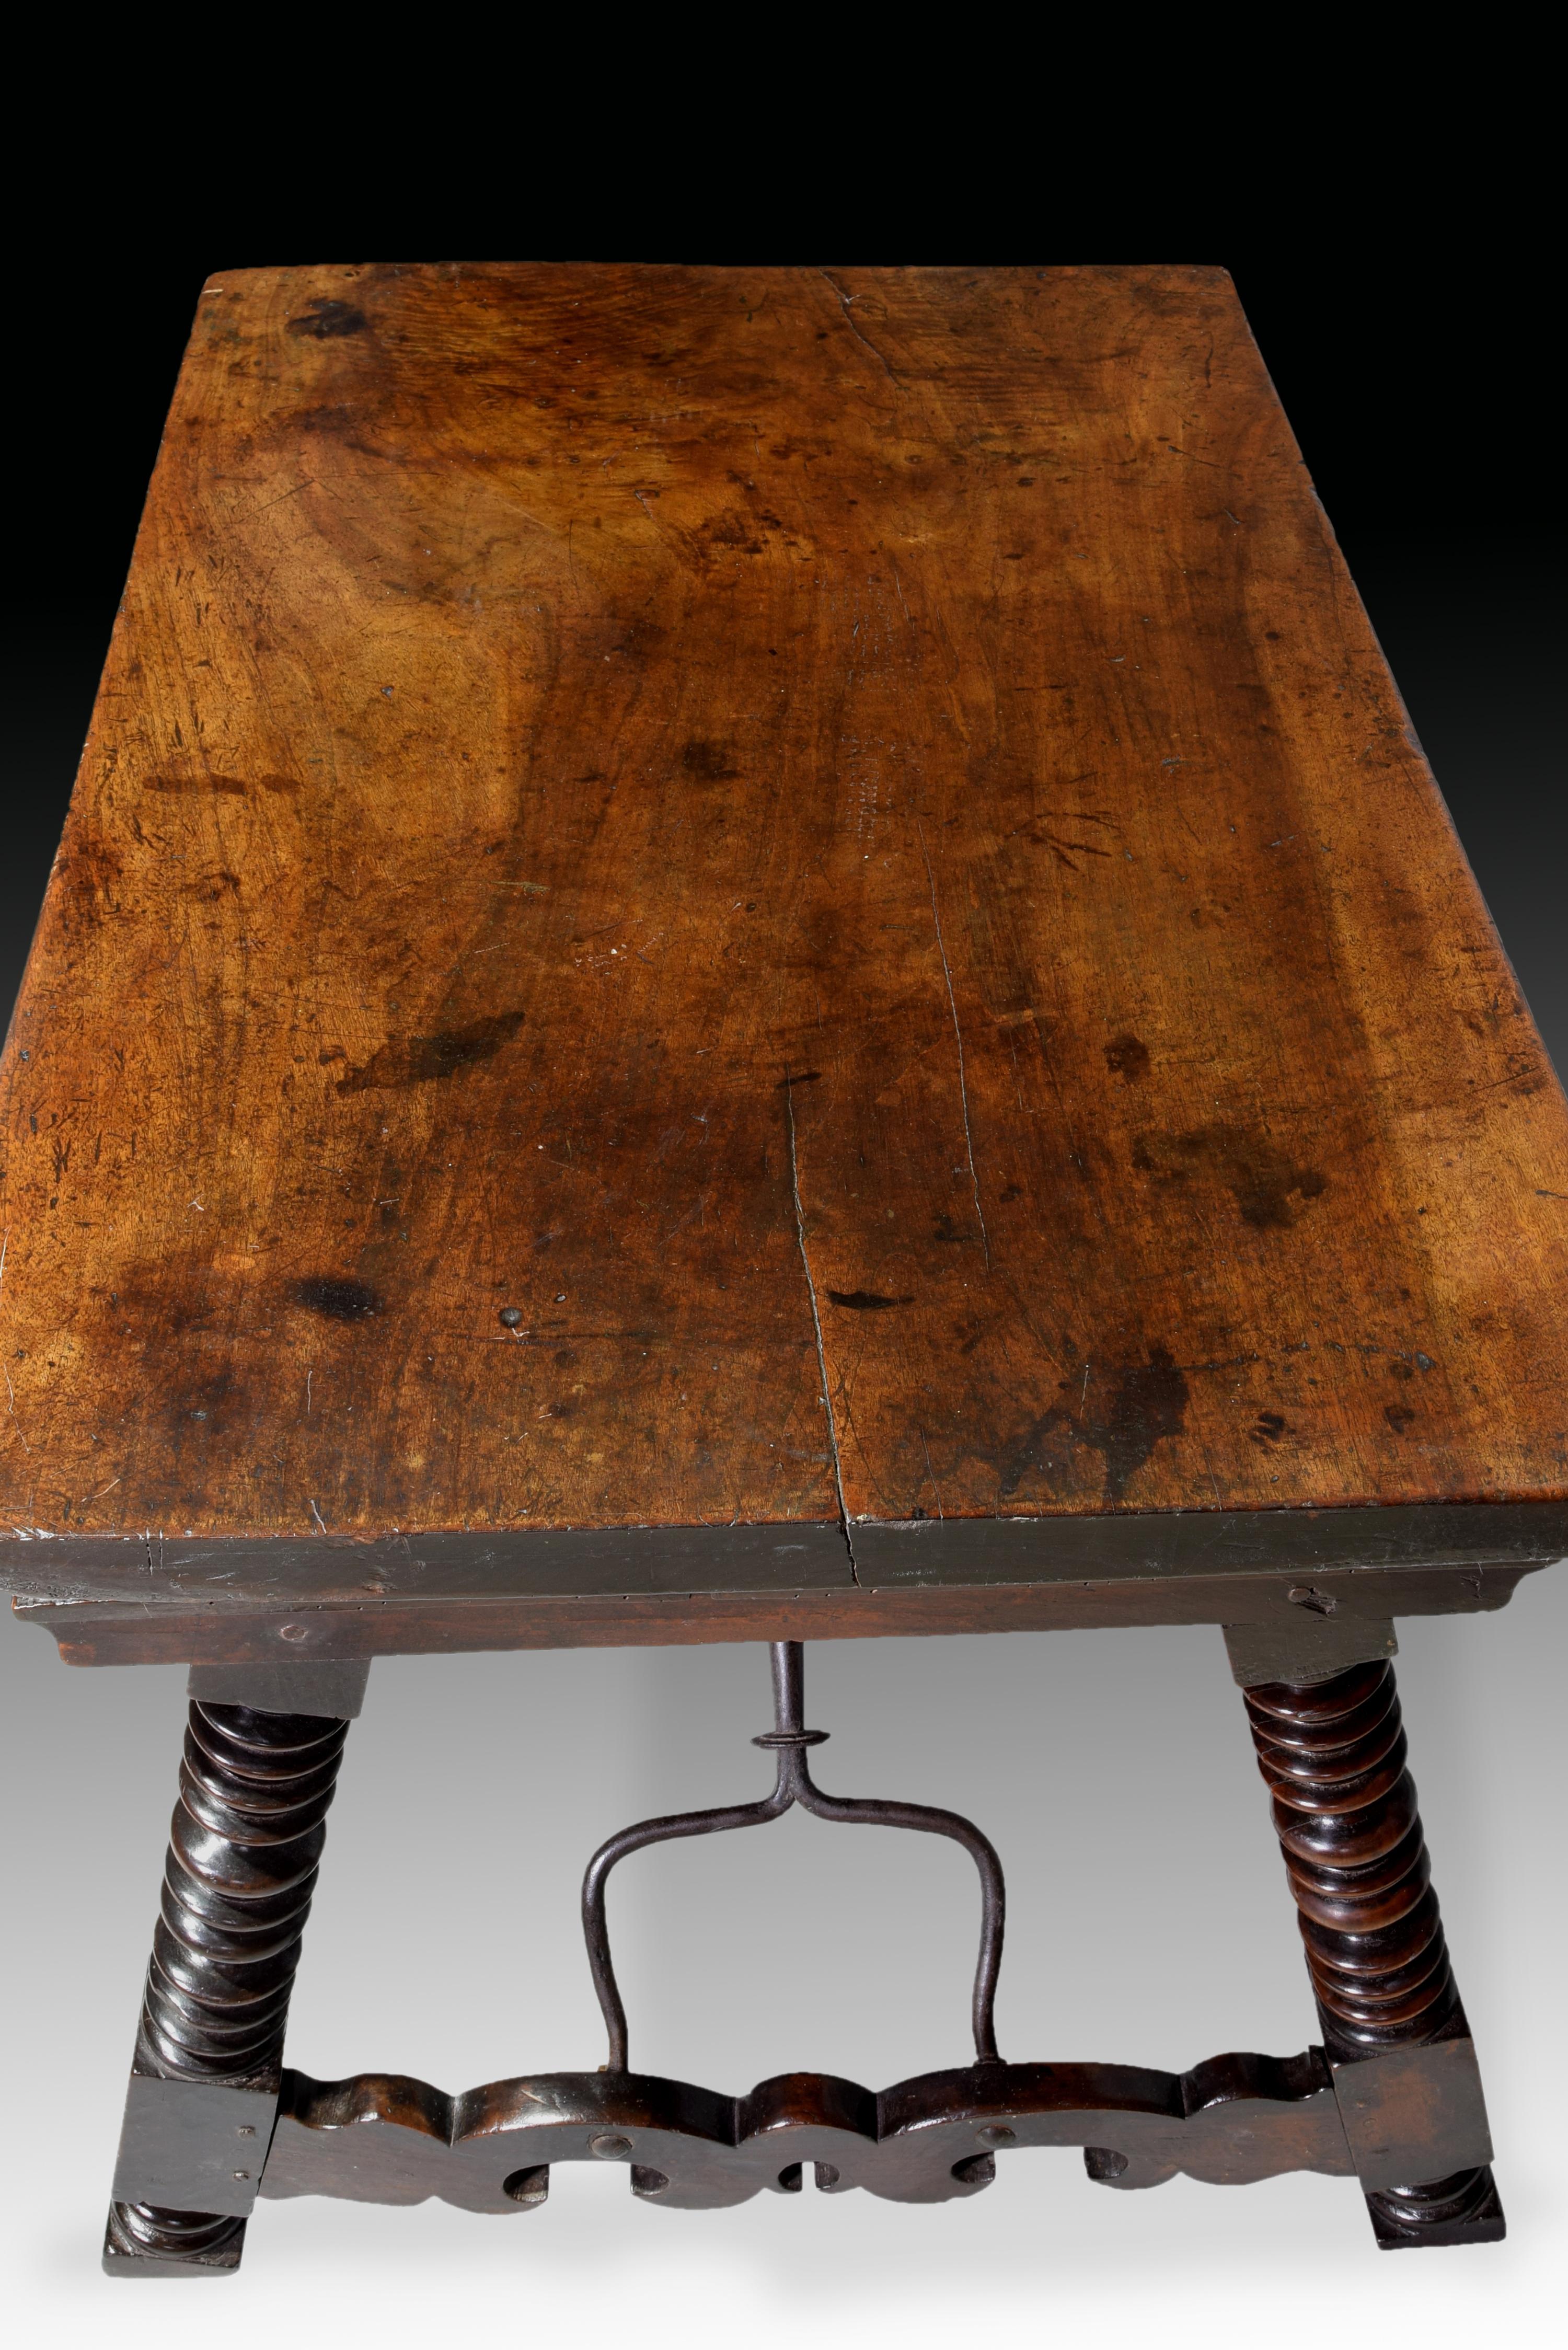 Table, Walnut, Wrought Iron, Spain, 17th Century For Sale 9